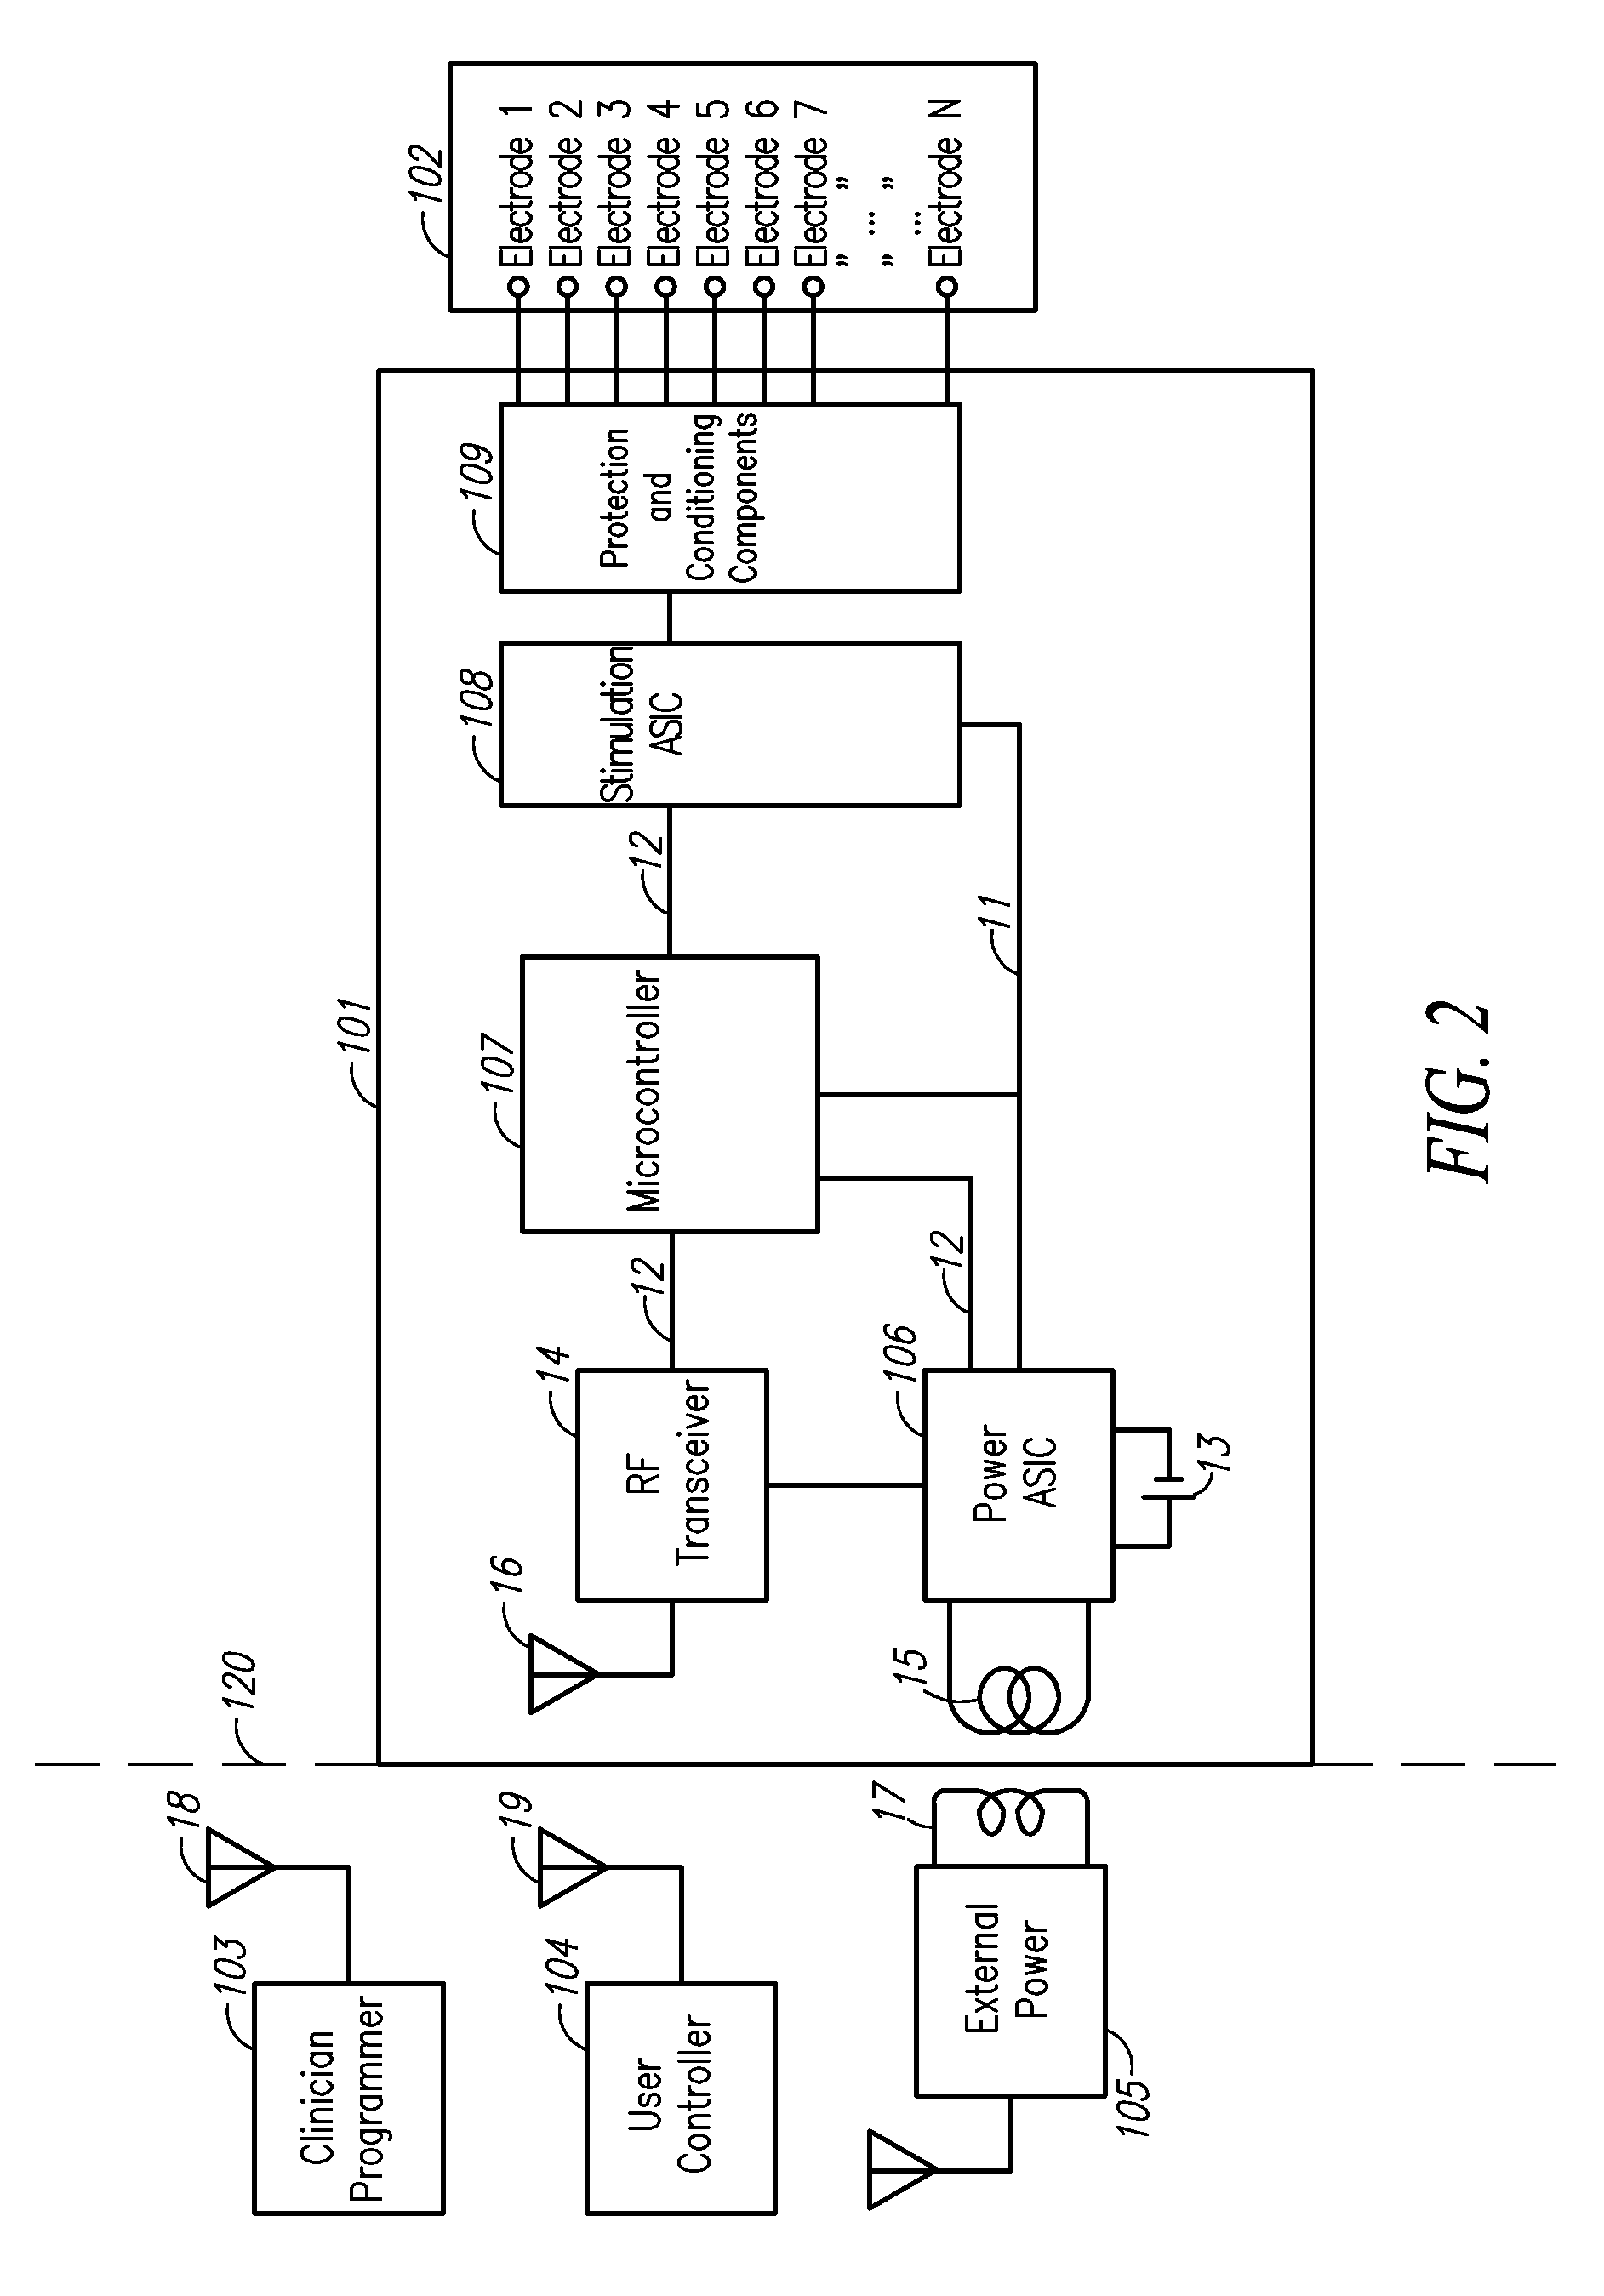 Arbitrary waveform generator and neural stimulation application with scalable waveform feature